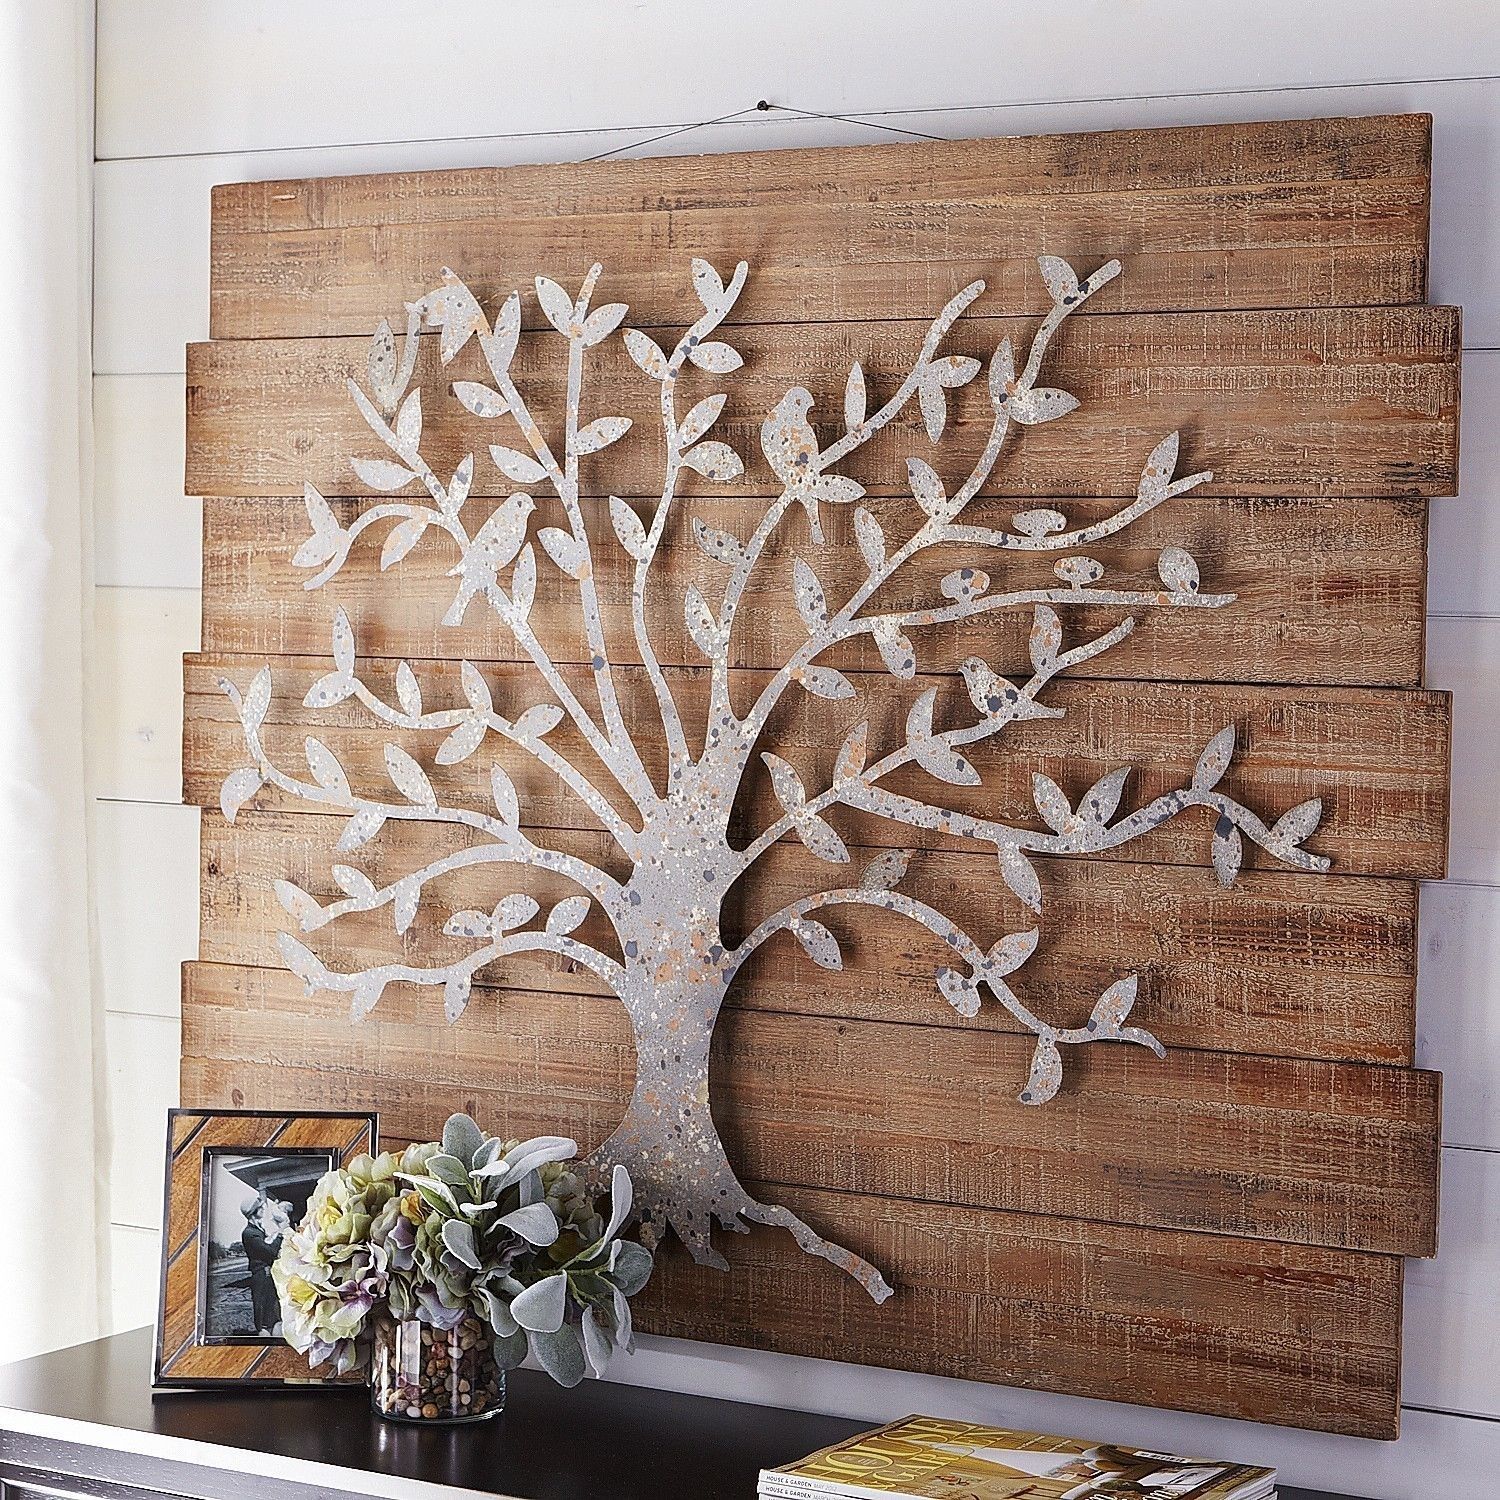 Timeless Tree Wall Decor | Pier 1 Imports … | Metal Work In 2018… Inside Tree Of Life Metal Wall Art (View 4 of 20)